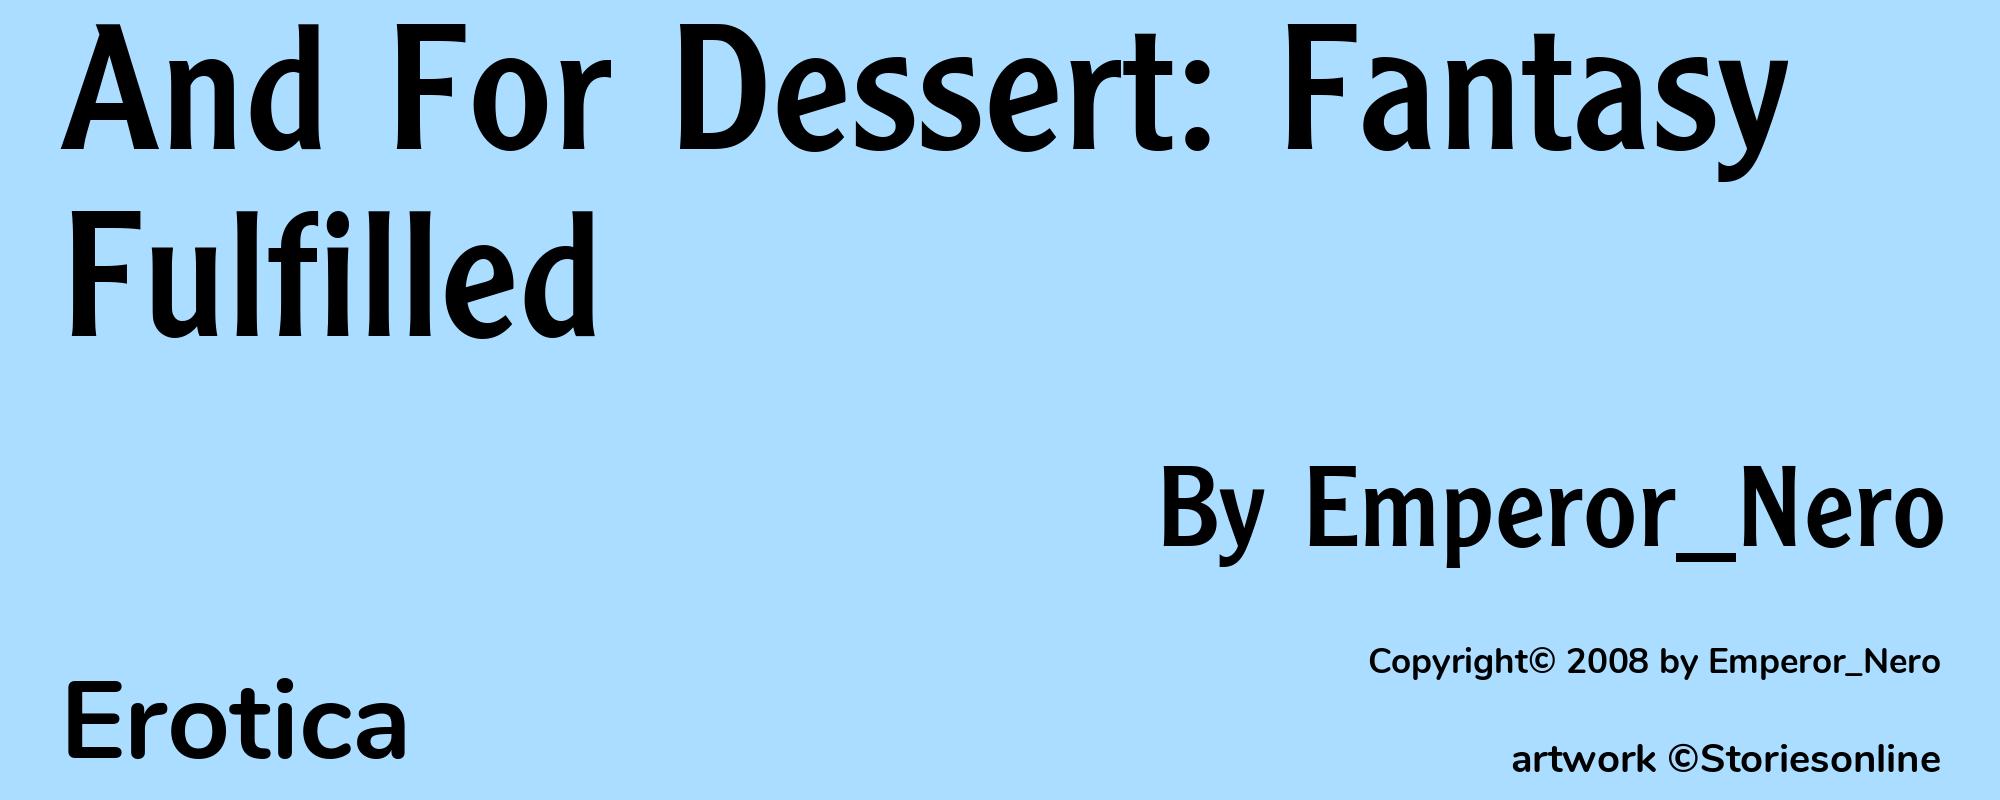 And For Dessert: Fantasy Fulfilled - Cover